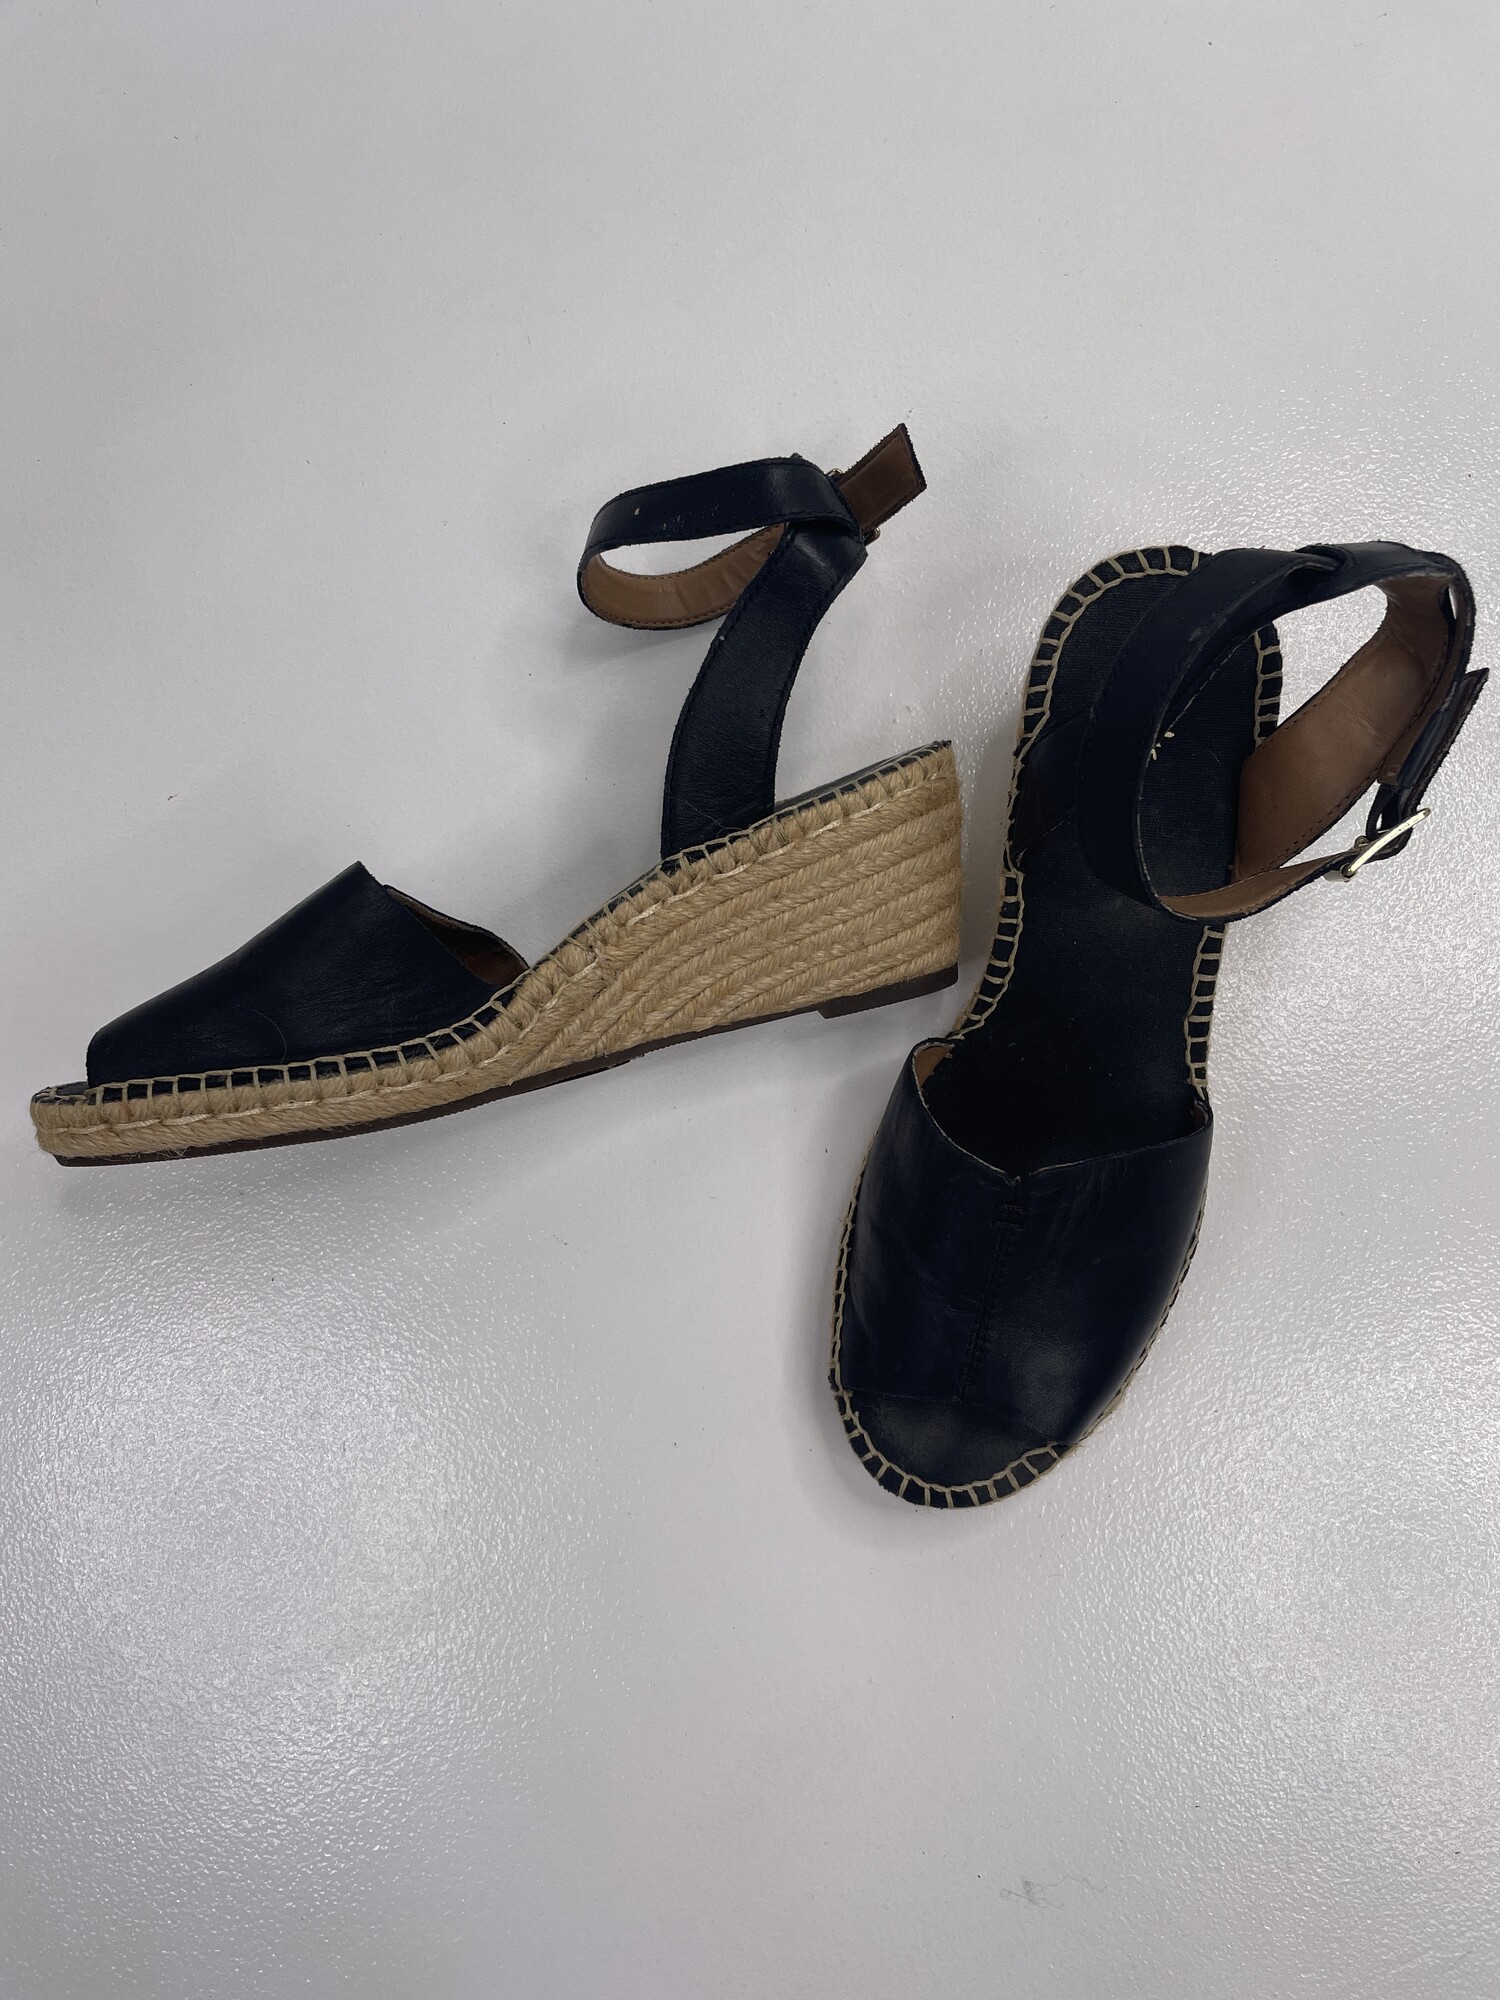 Clarks Wedges, Size: 9.5